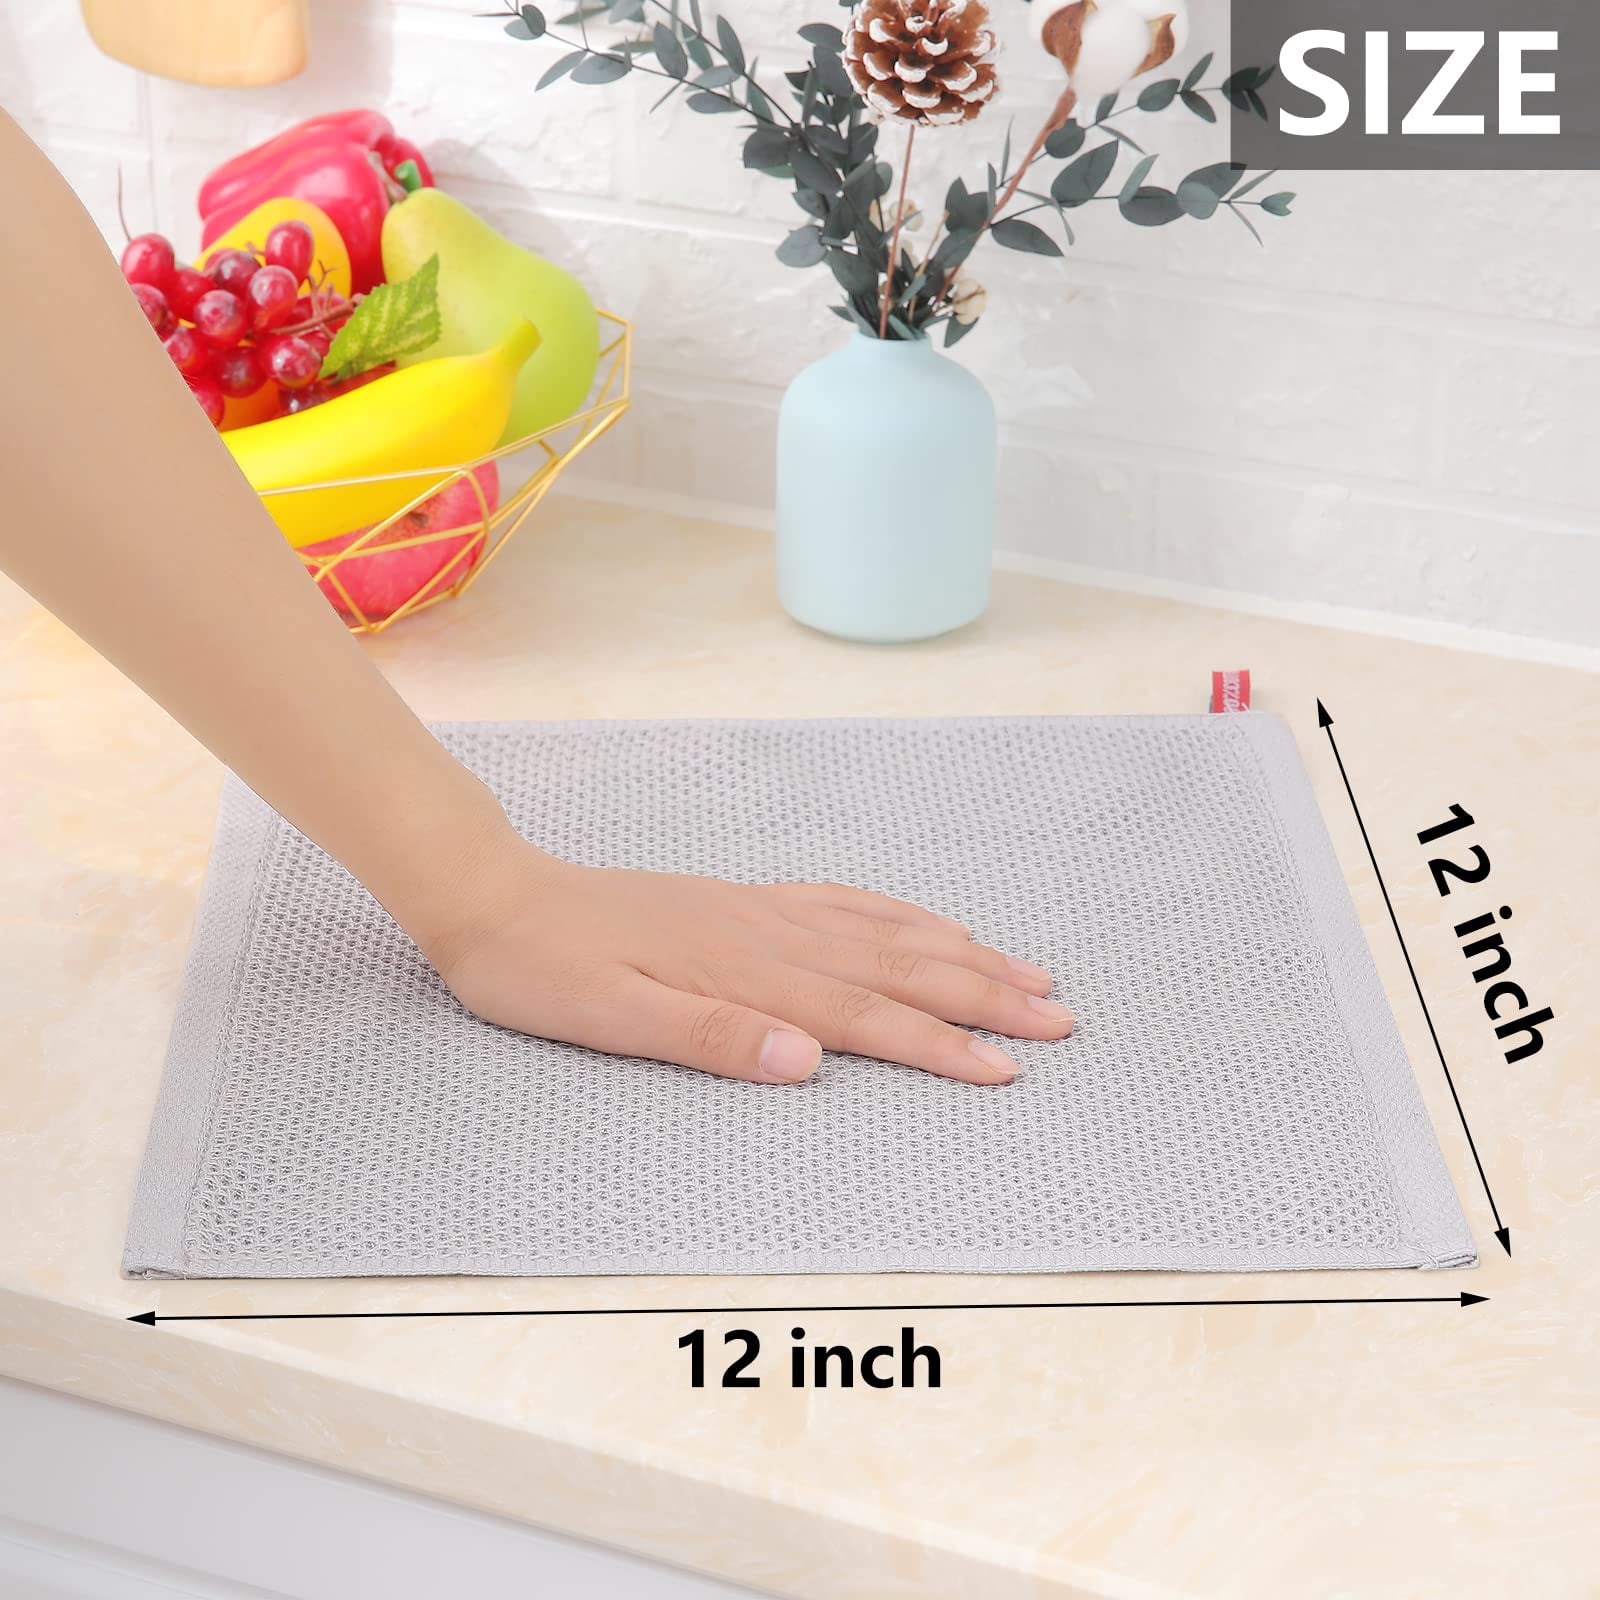 ANEWAY Kitchen Towels 100% Cotton Waffle Weave Dish Towel for Cleaning  Drying Dishes Extra Absorbent and Soft, Dish Cloth,13 x 28 in(Beige-4 Pack)